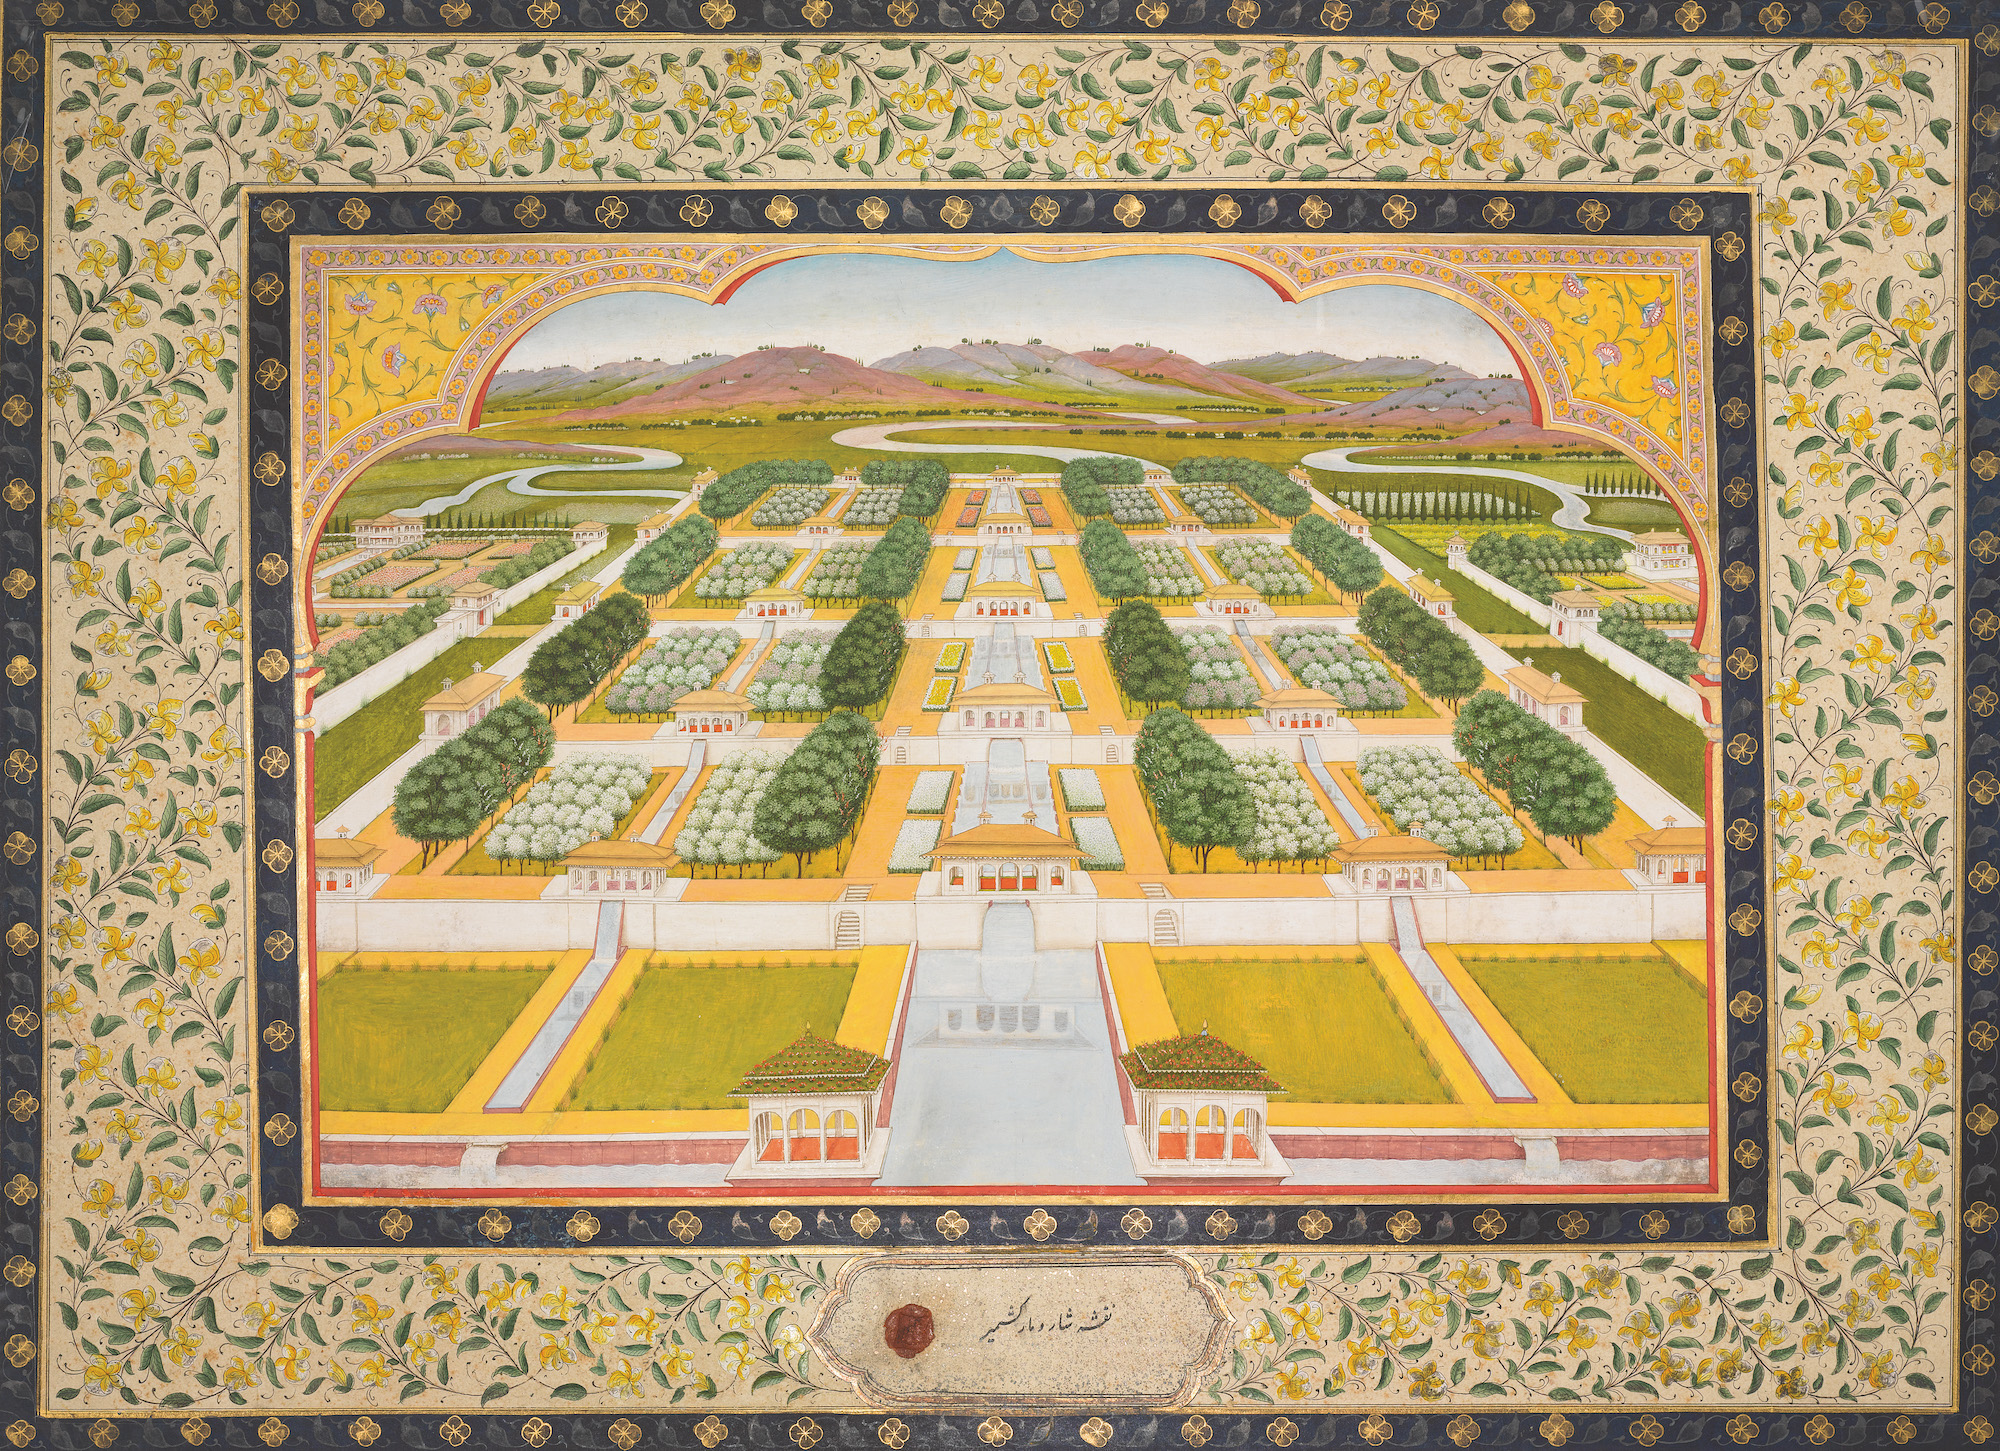 An 18th-century drawing of a Mughal garden.